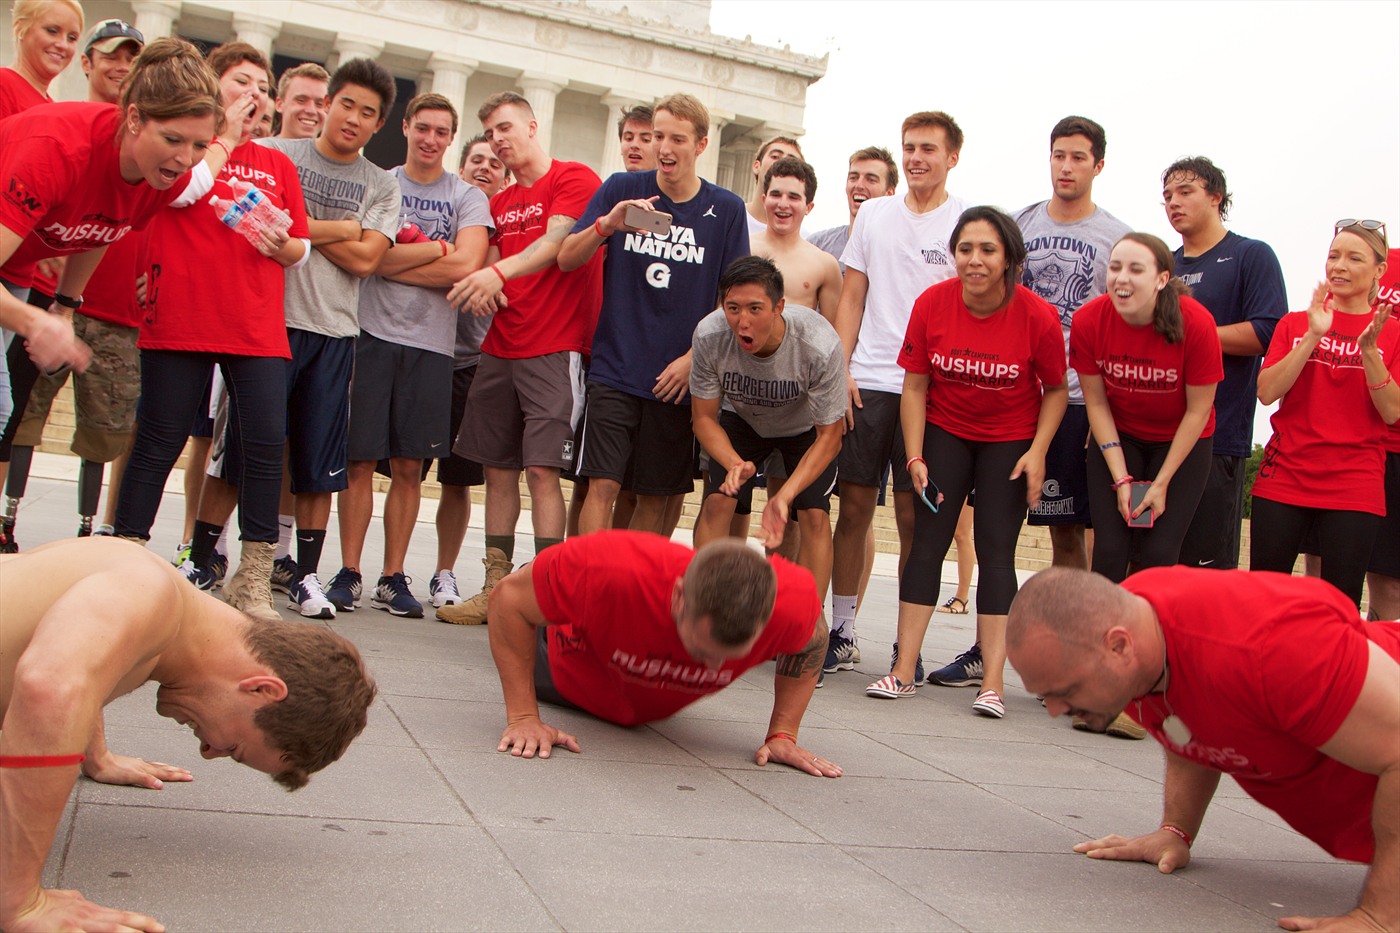 Students from Georgetown University participate in Boot Campagin's Pushups for Charity